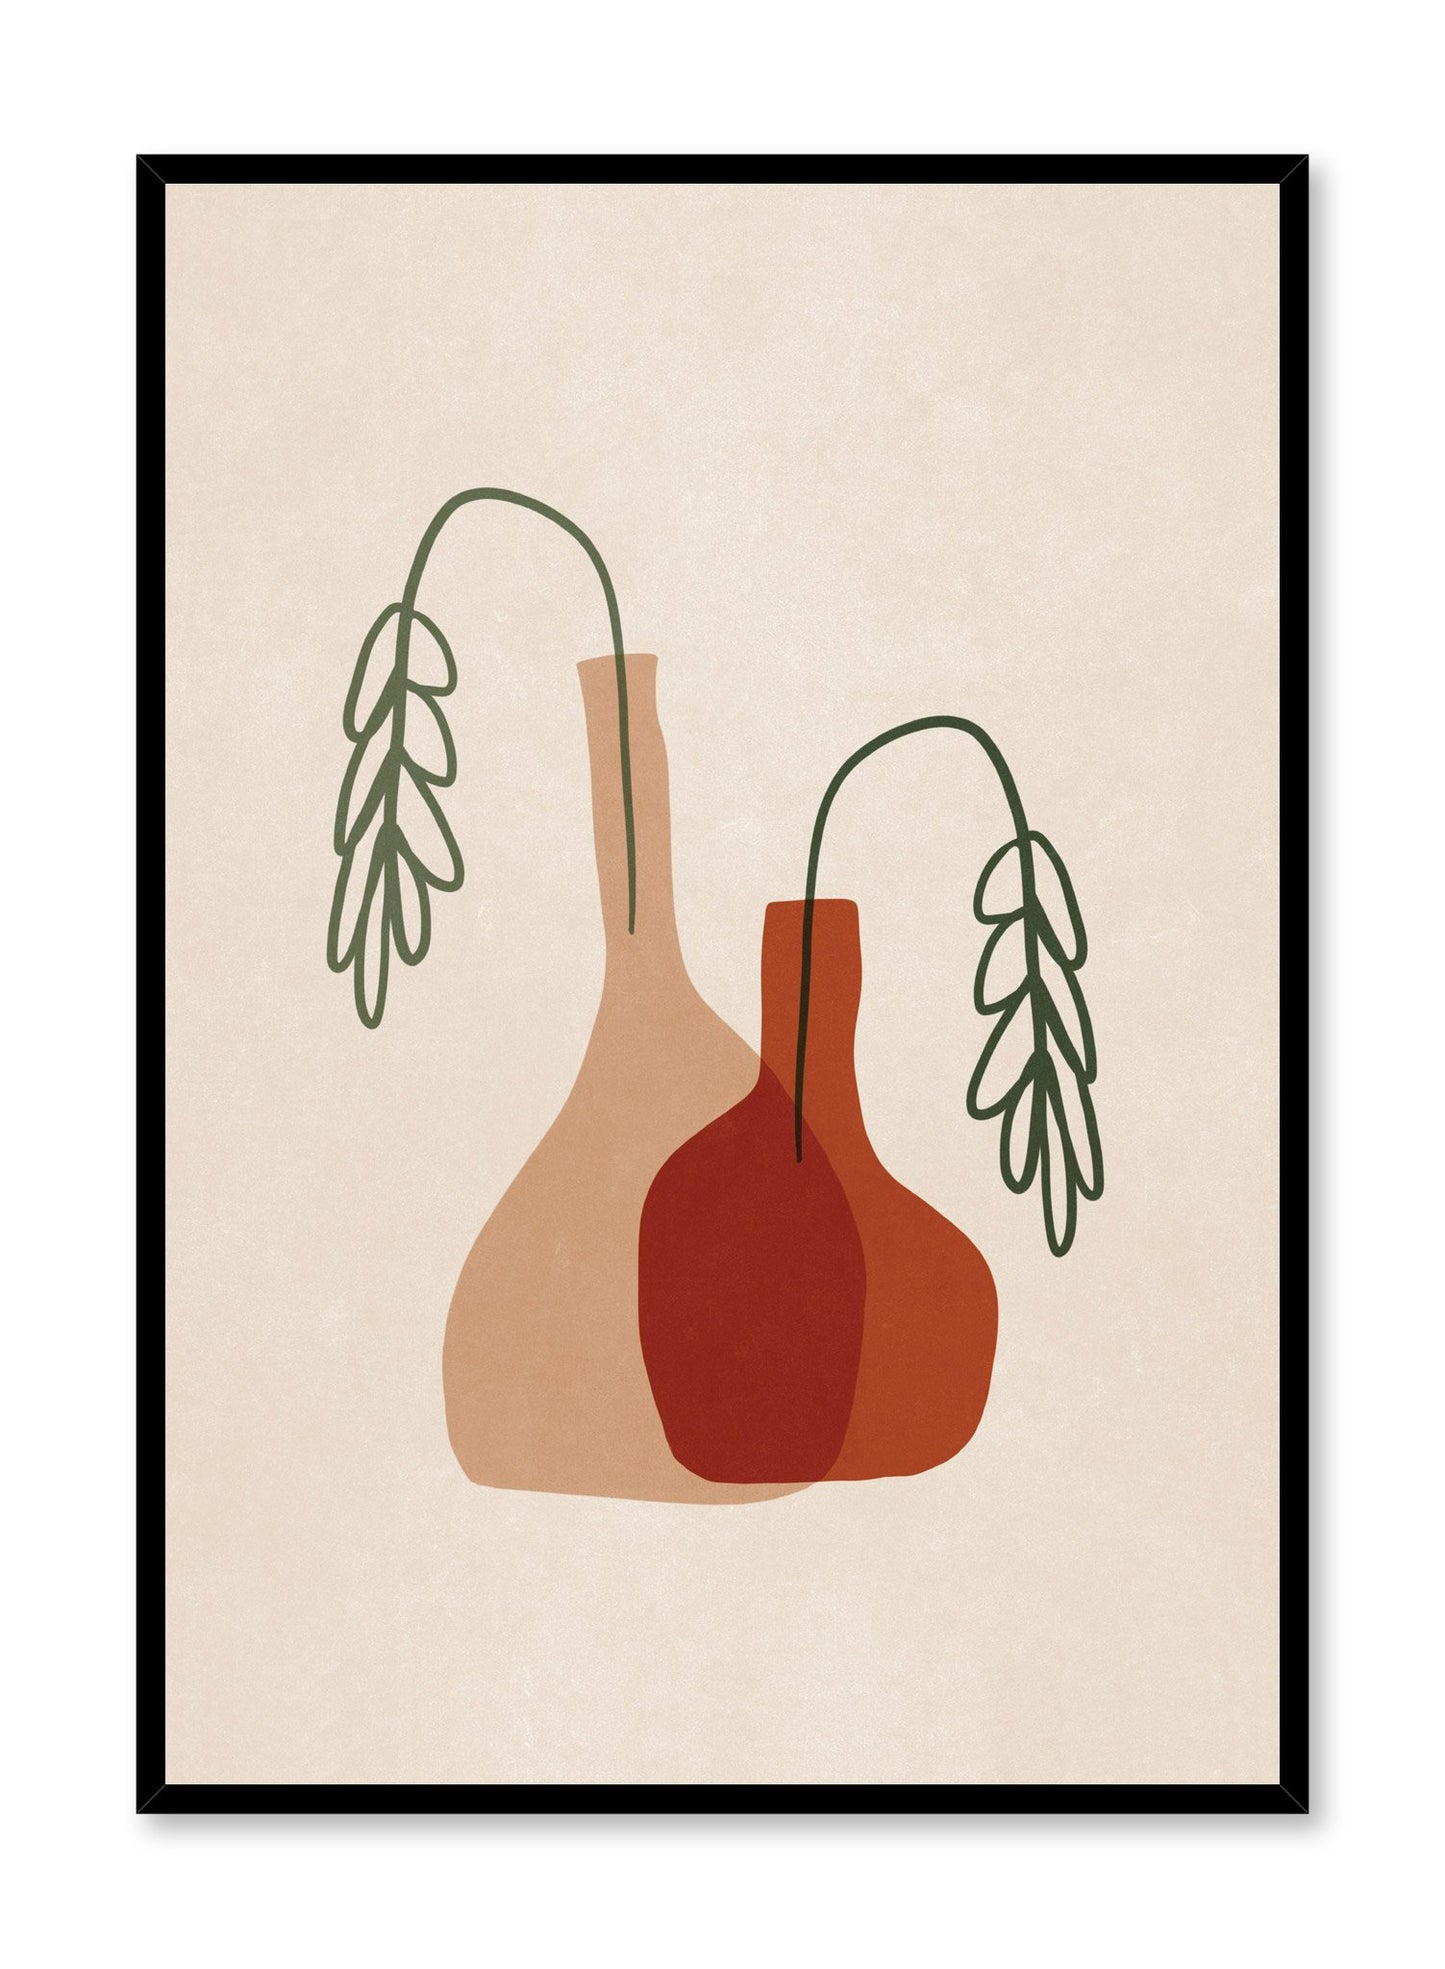 Modern minimalist illustration poster by Opposite Wall with vases and wilted leaves.